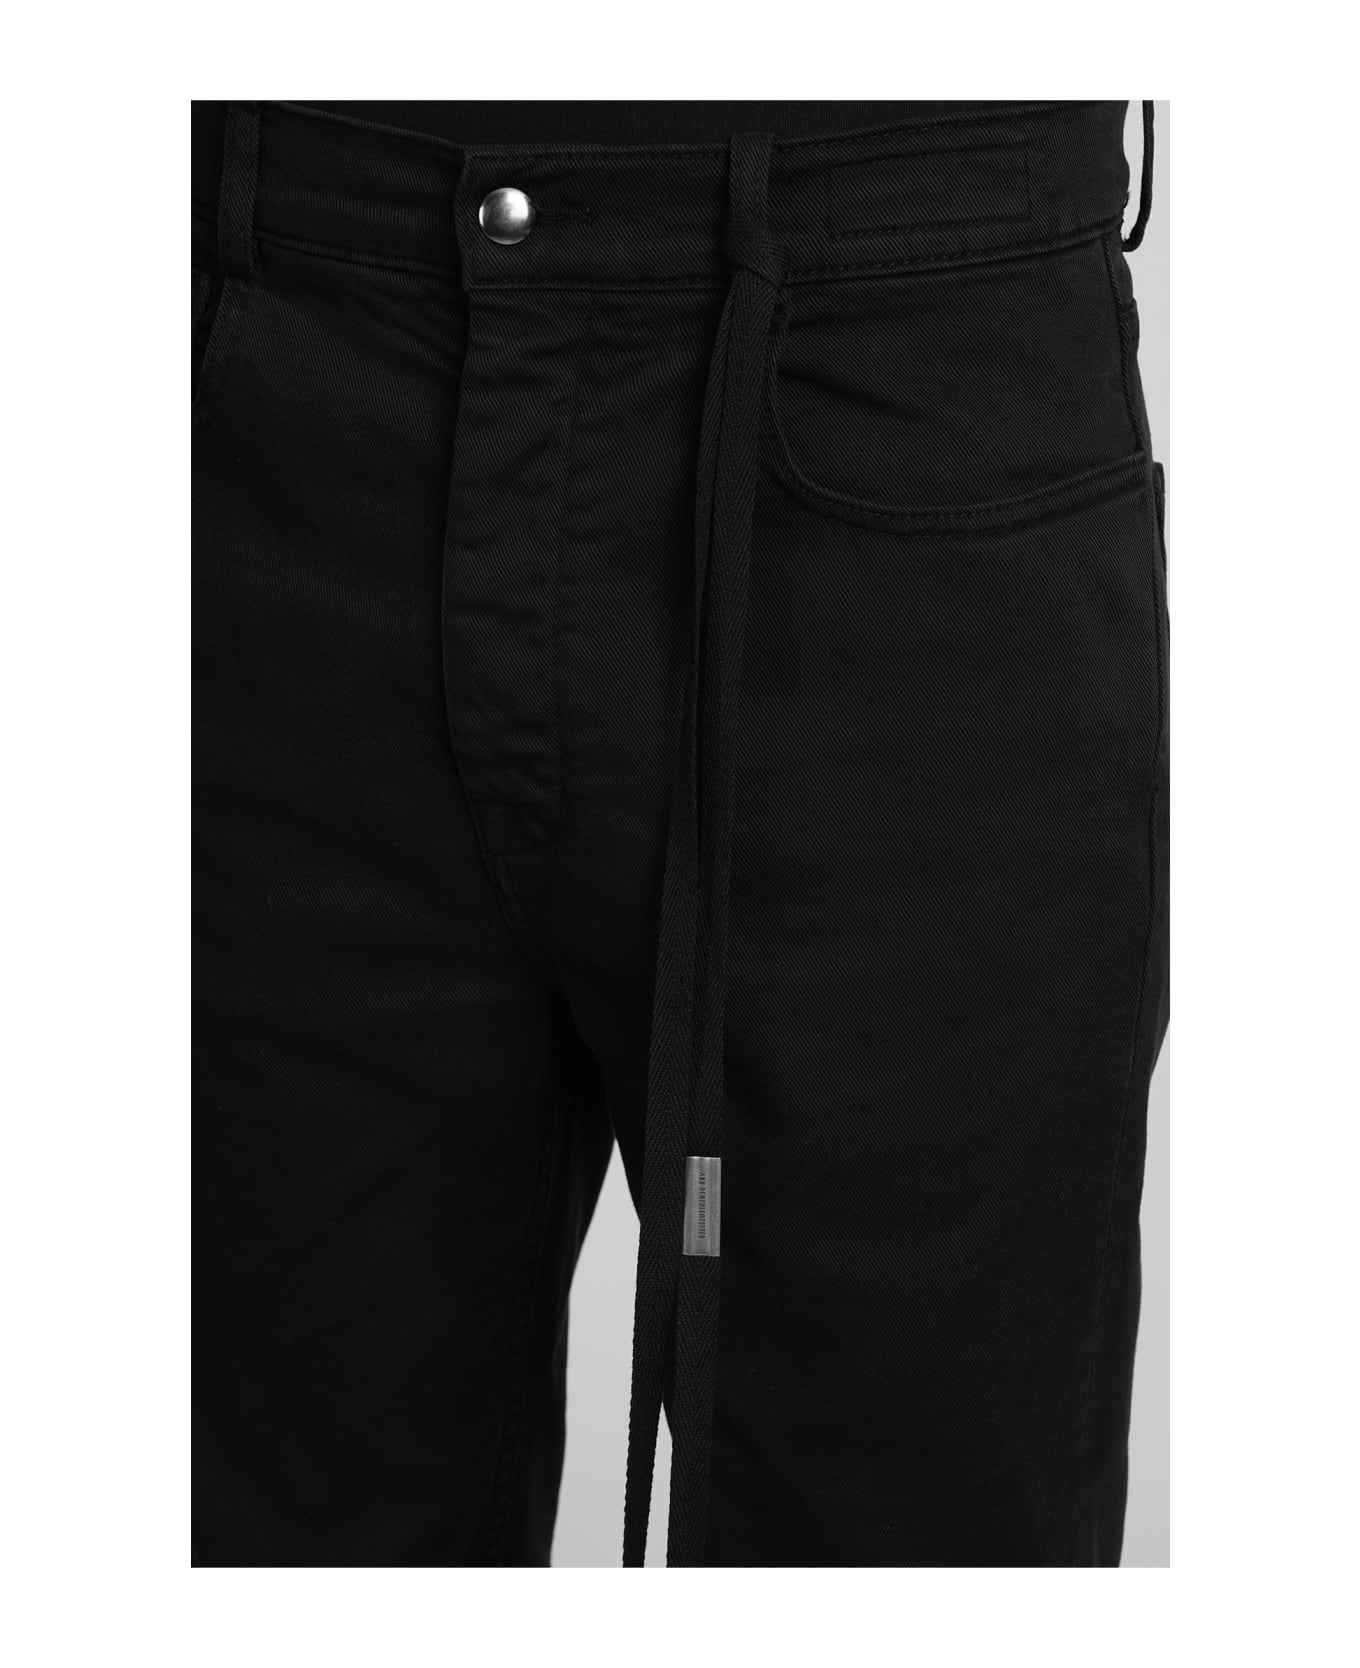 Ann Demeulemeester Jeans In Black Cotton - black ボトムス